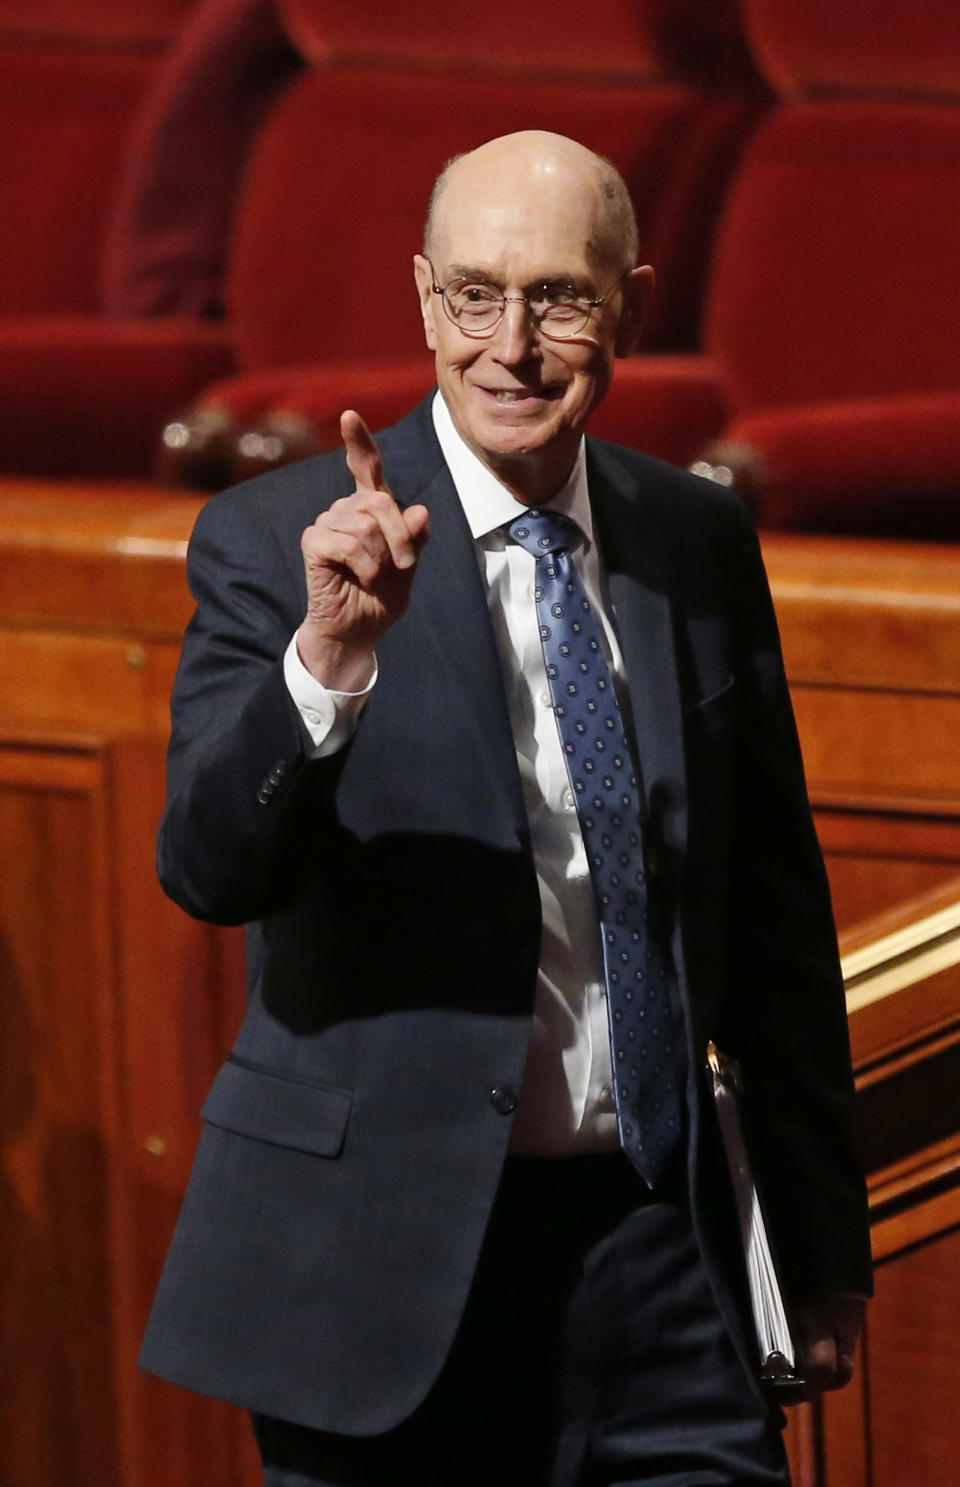 Mormon leader Henry B. Eyring leaves after the morning session of the twice-annual conference of The Church of Jesus Christ of Latter-day Saints Saturday, Oct. 6, 2018, in Salt Lake City. (AP Photo/Rick Bowmer)